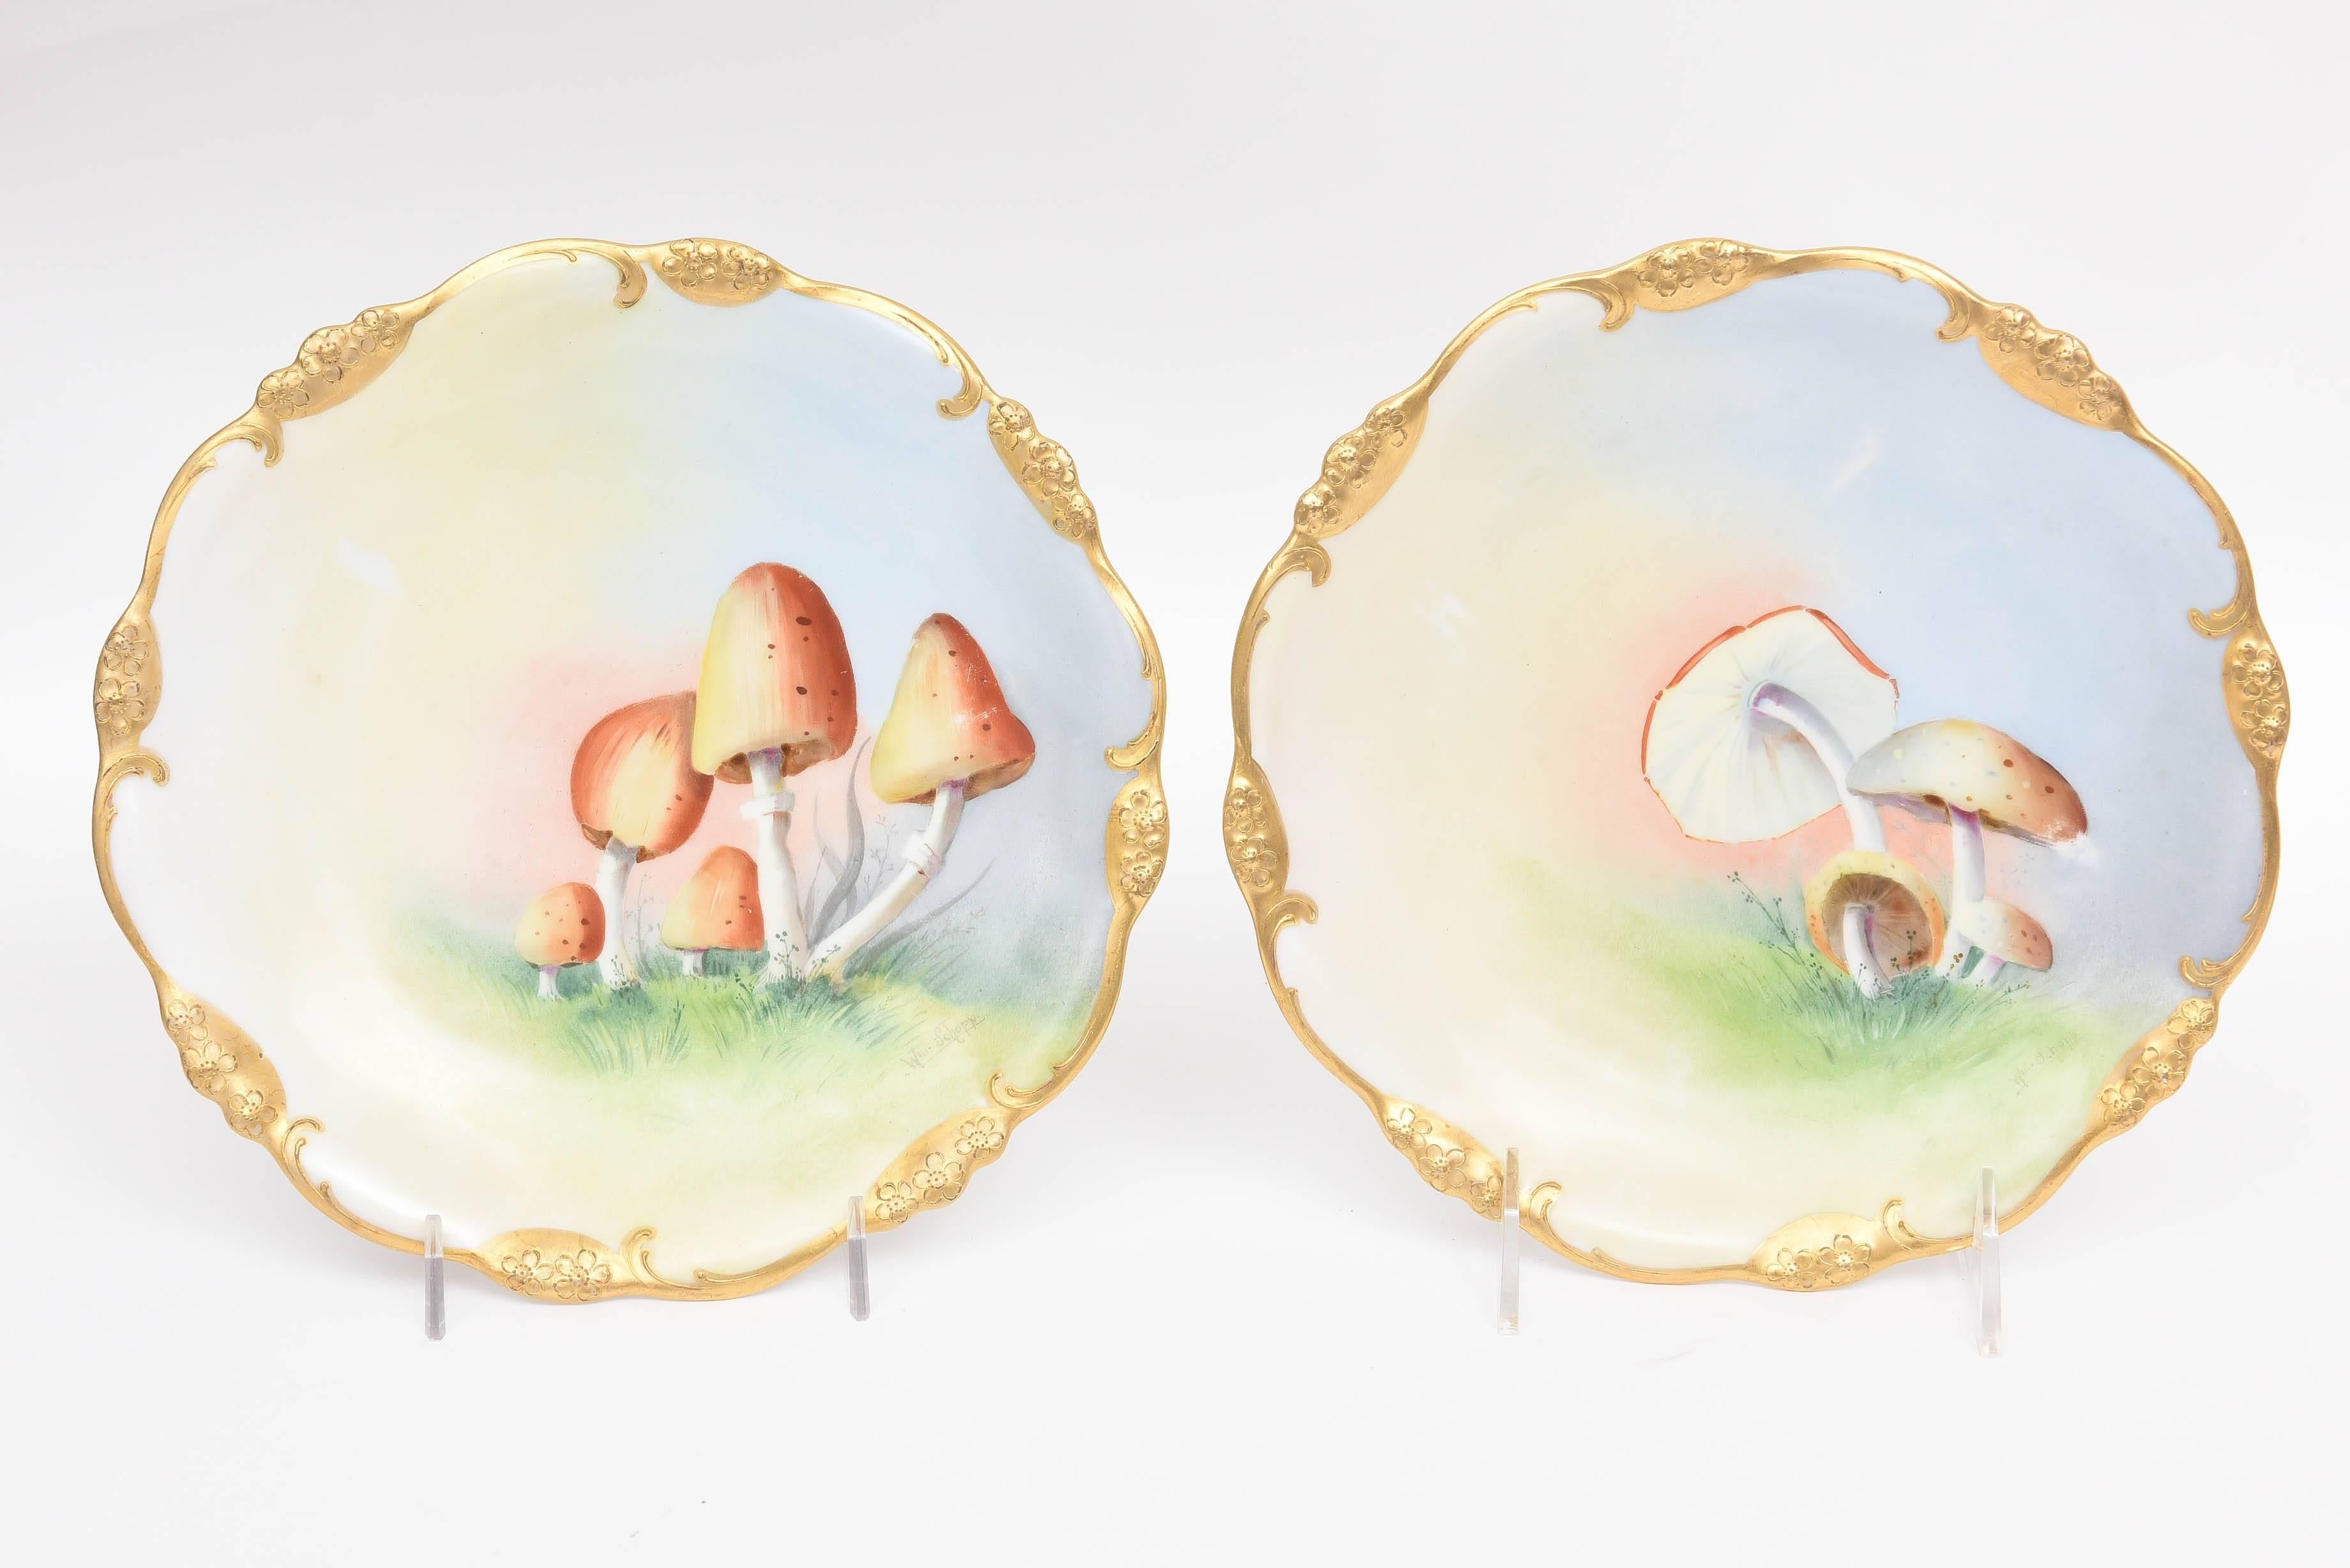 Early 20th Century 12 Antique Hand-Painted Mushroom Plates, Gold Trim, Limoges